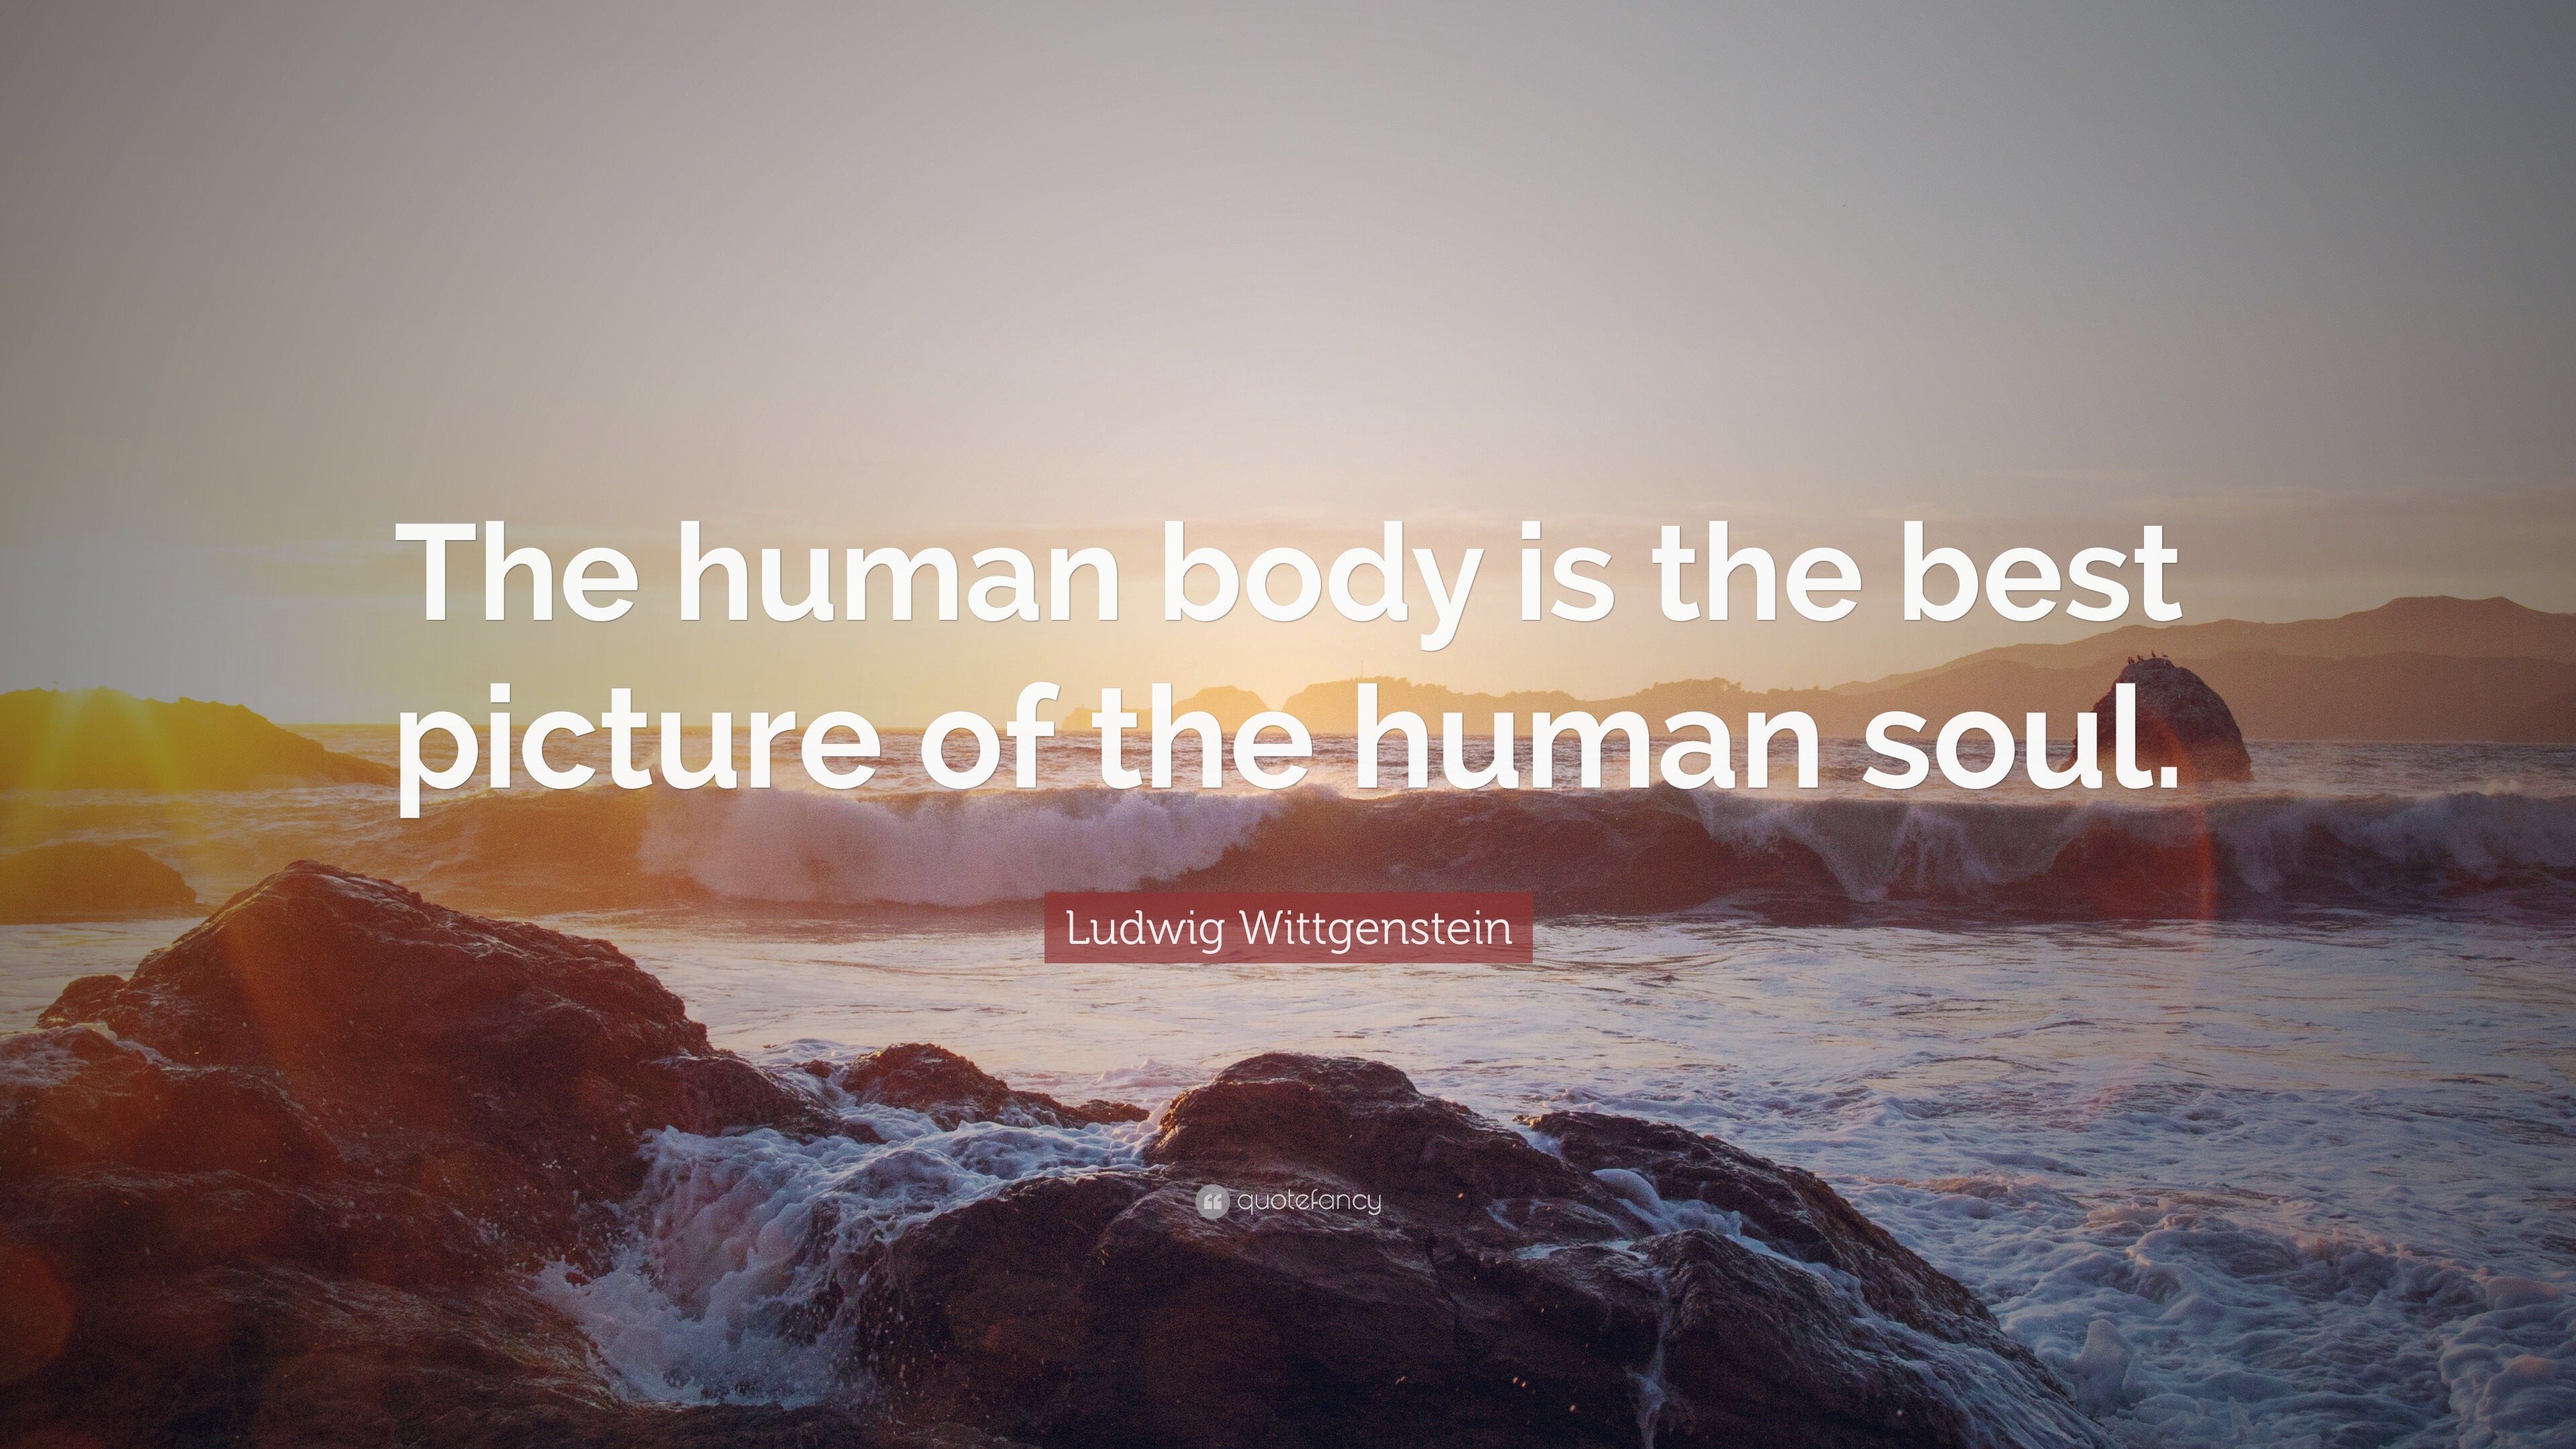 Ludwig Wittgenstein Quote: “The human